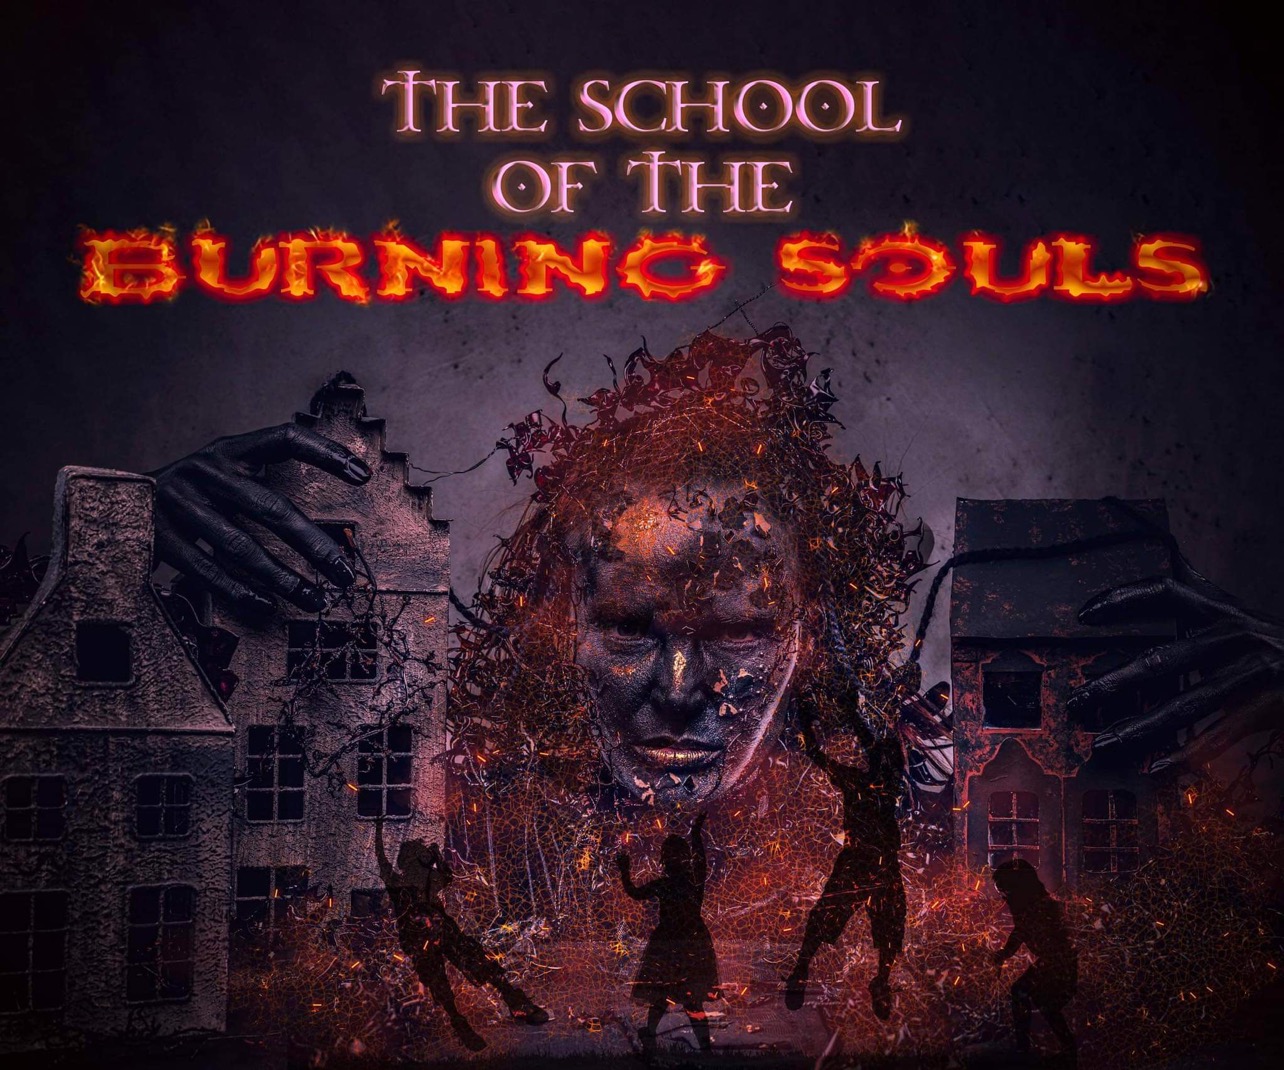 The School of the Burning Souls